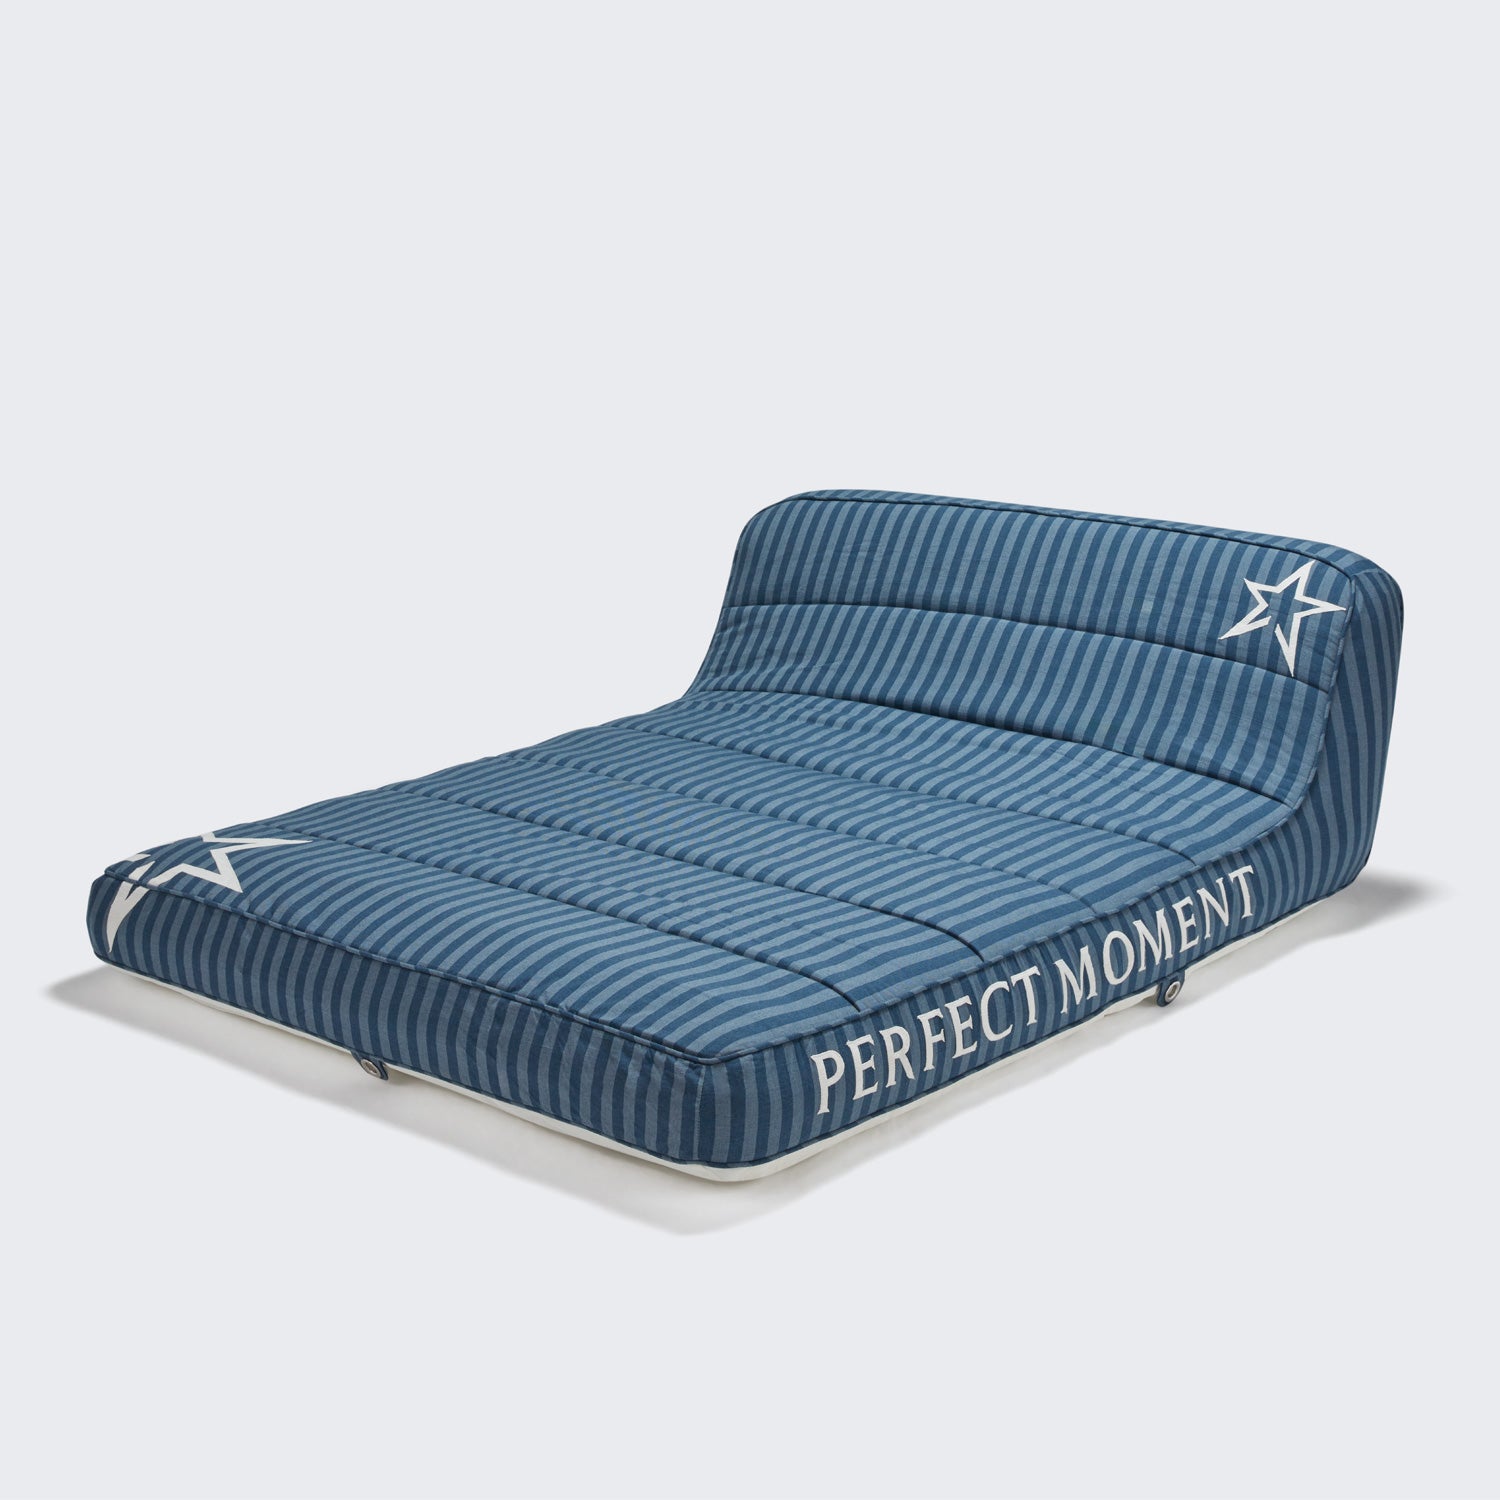 Deep-etched of a luxury denim pool float double on white background.